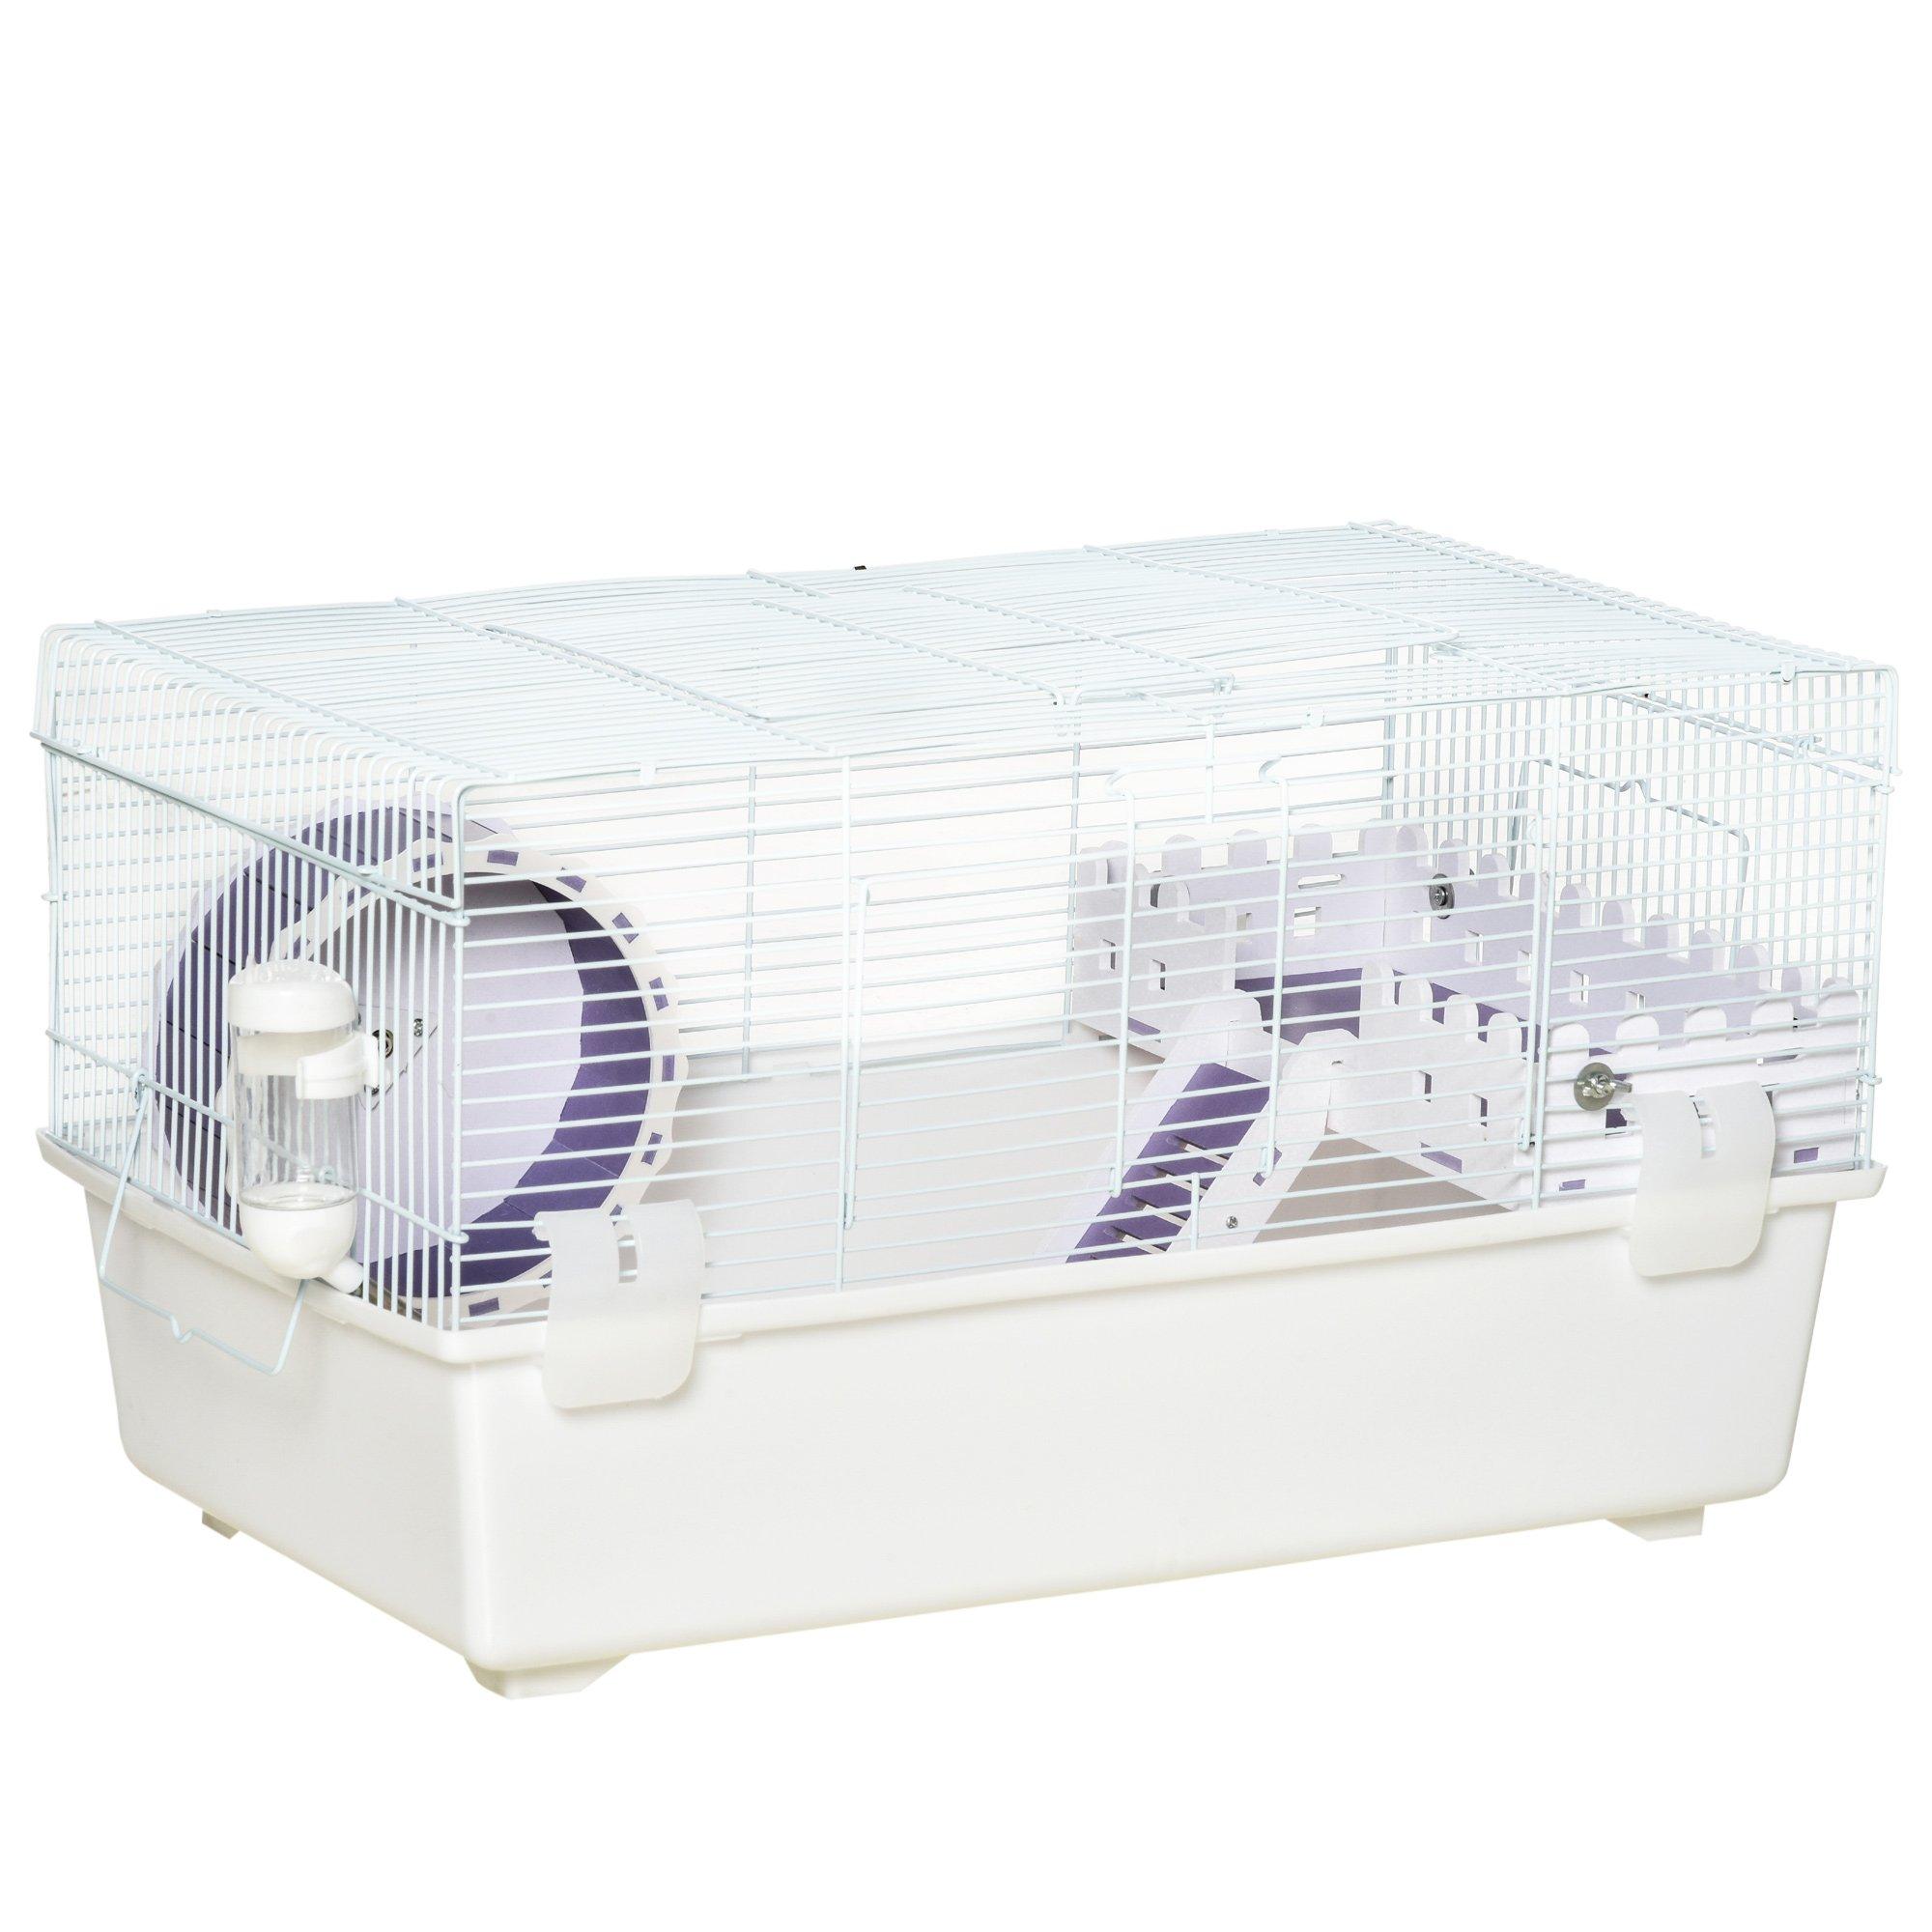 Two-Tier Hamster Cage Gerbil Haven withExercise Wheel, Water Bottle